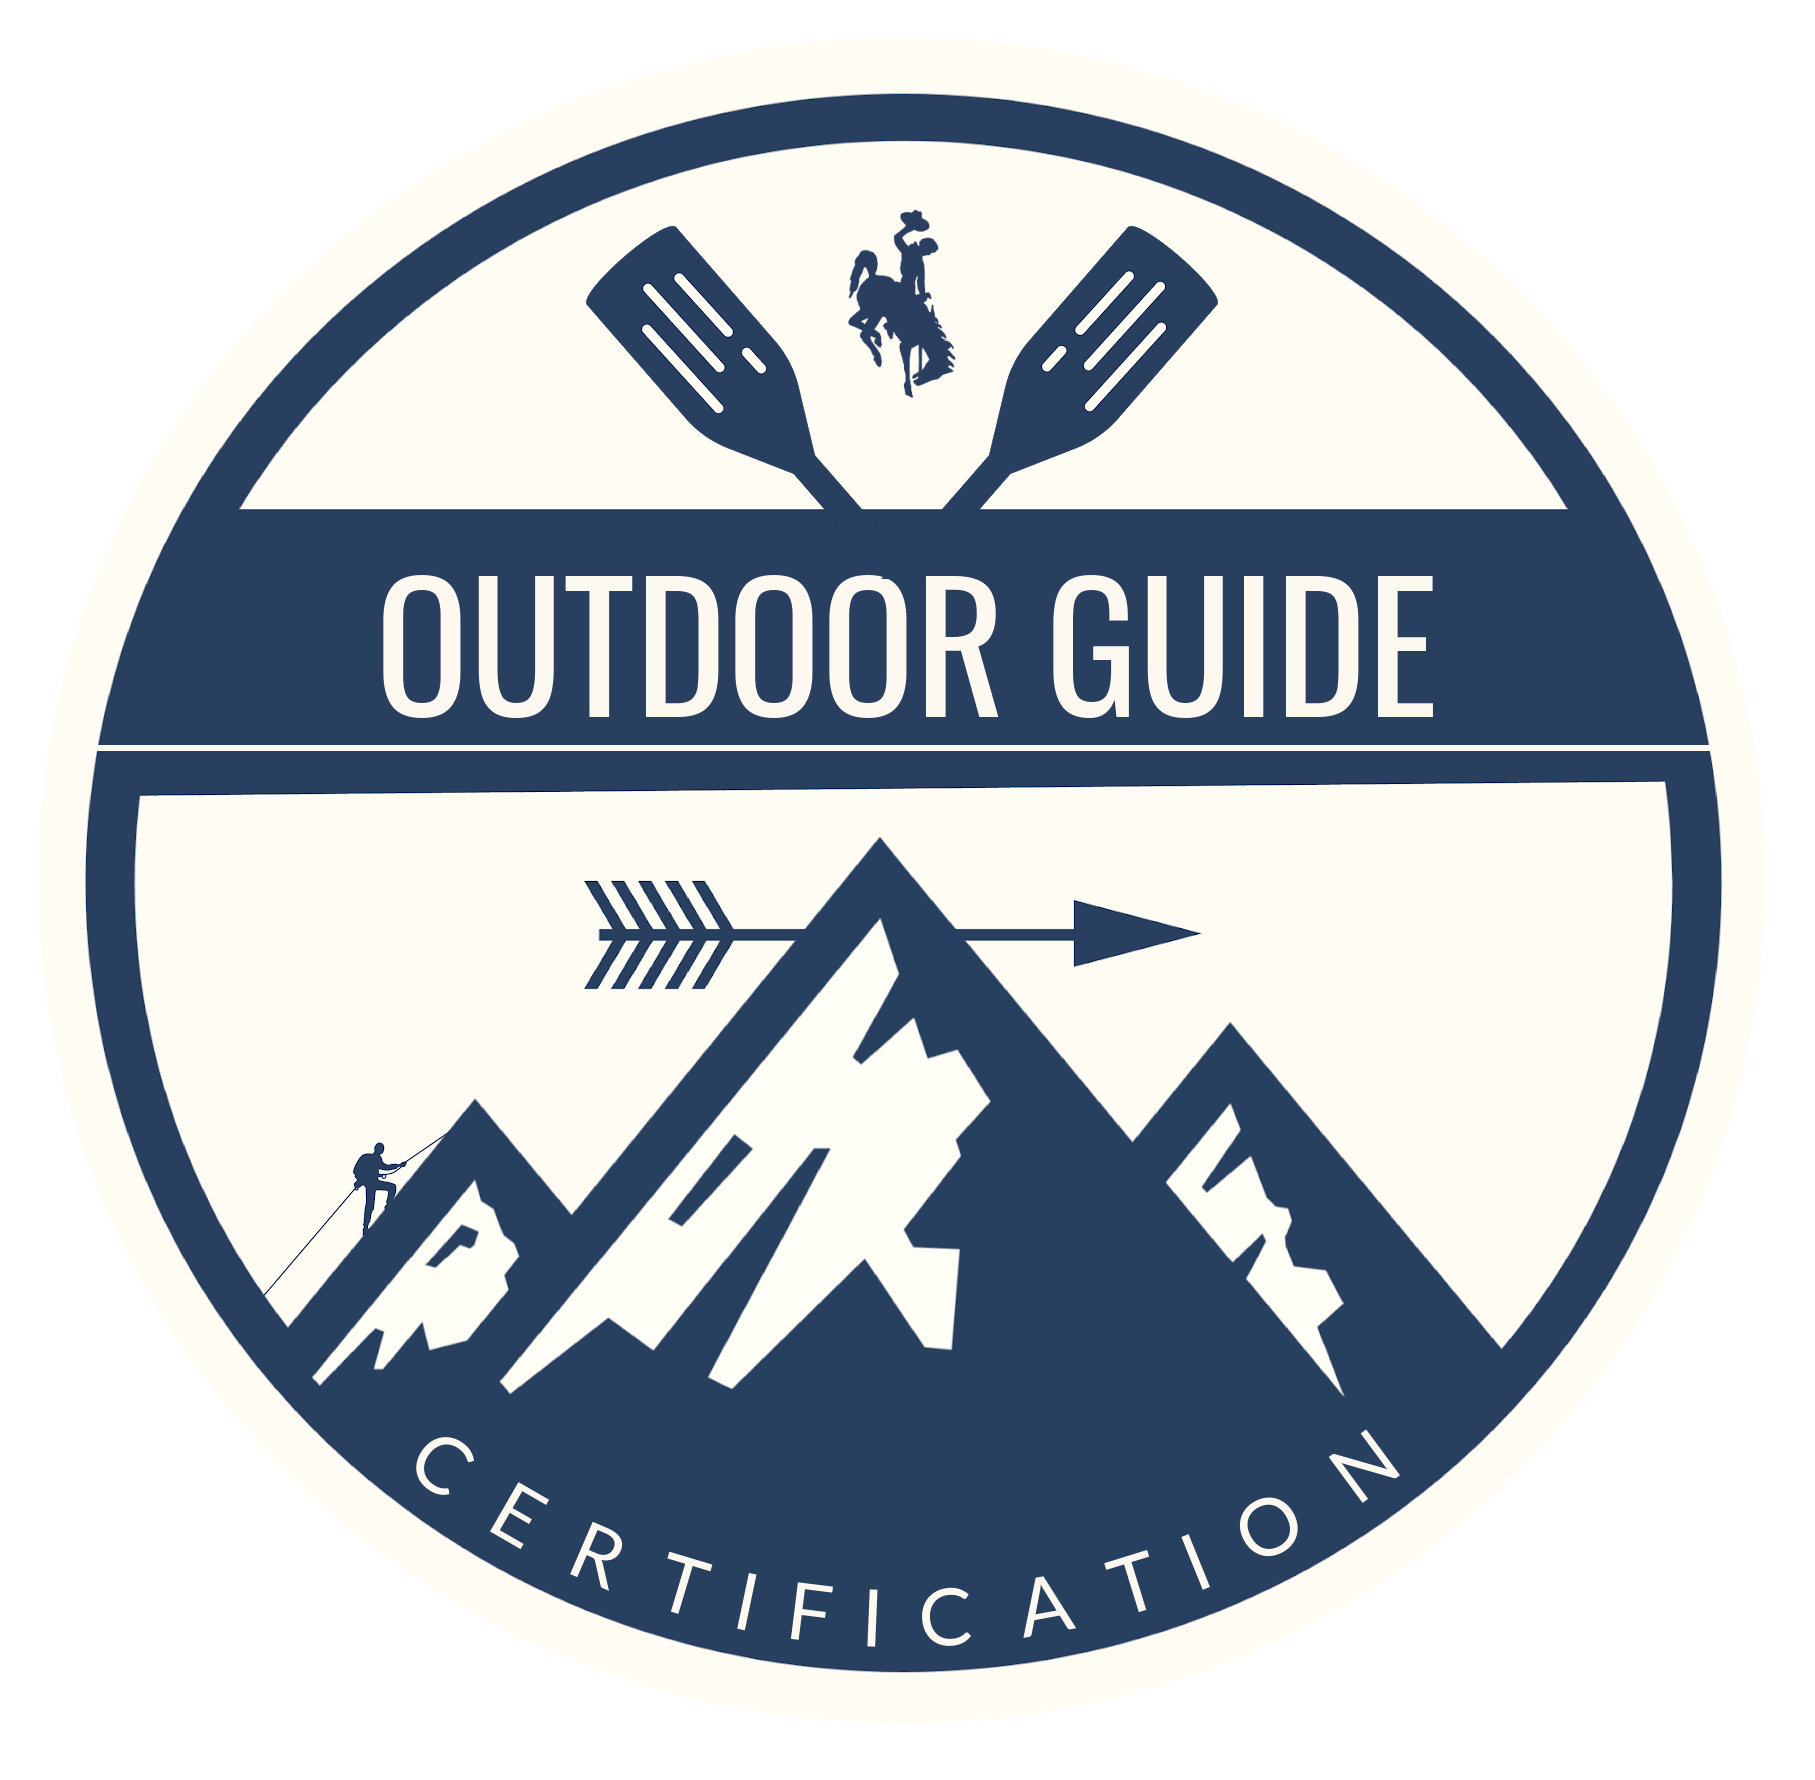 A round logo with blue colors and the words outdoor guide certification